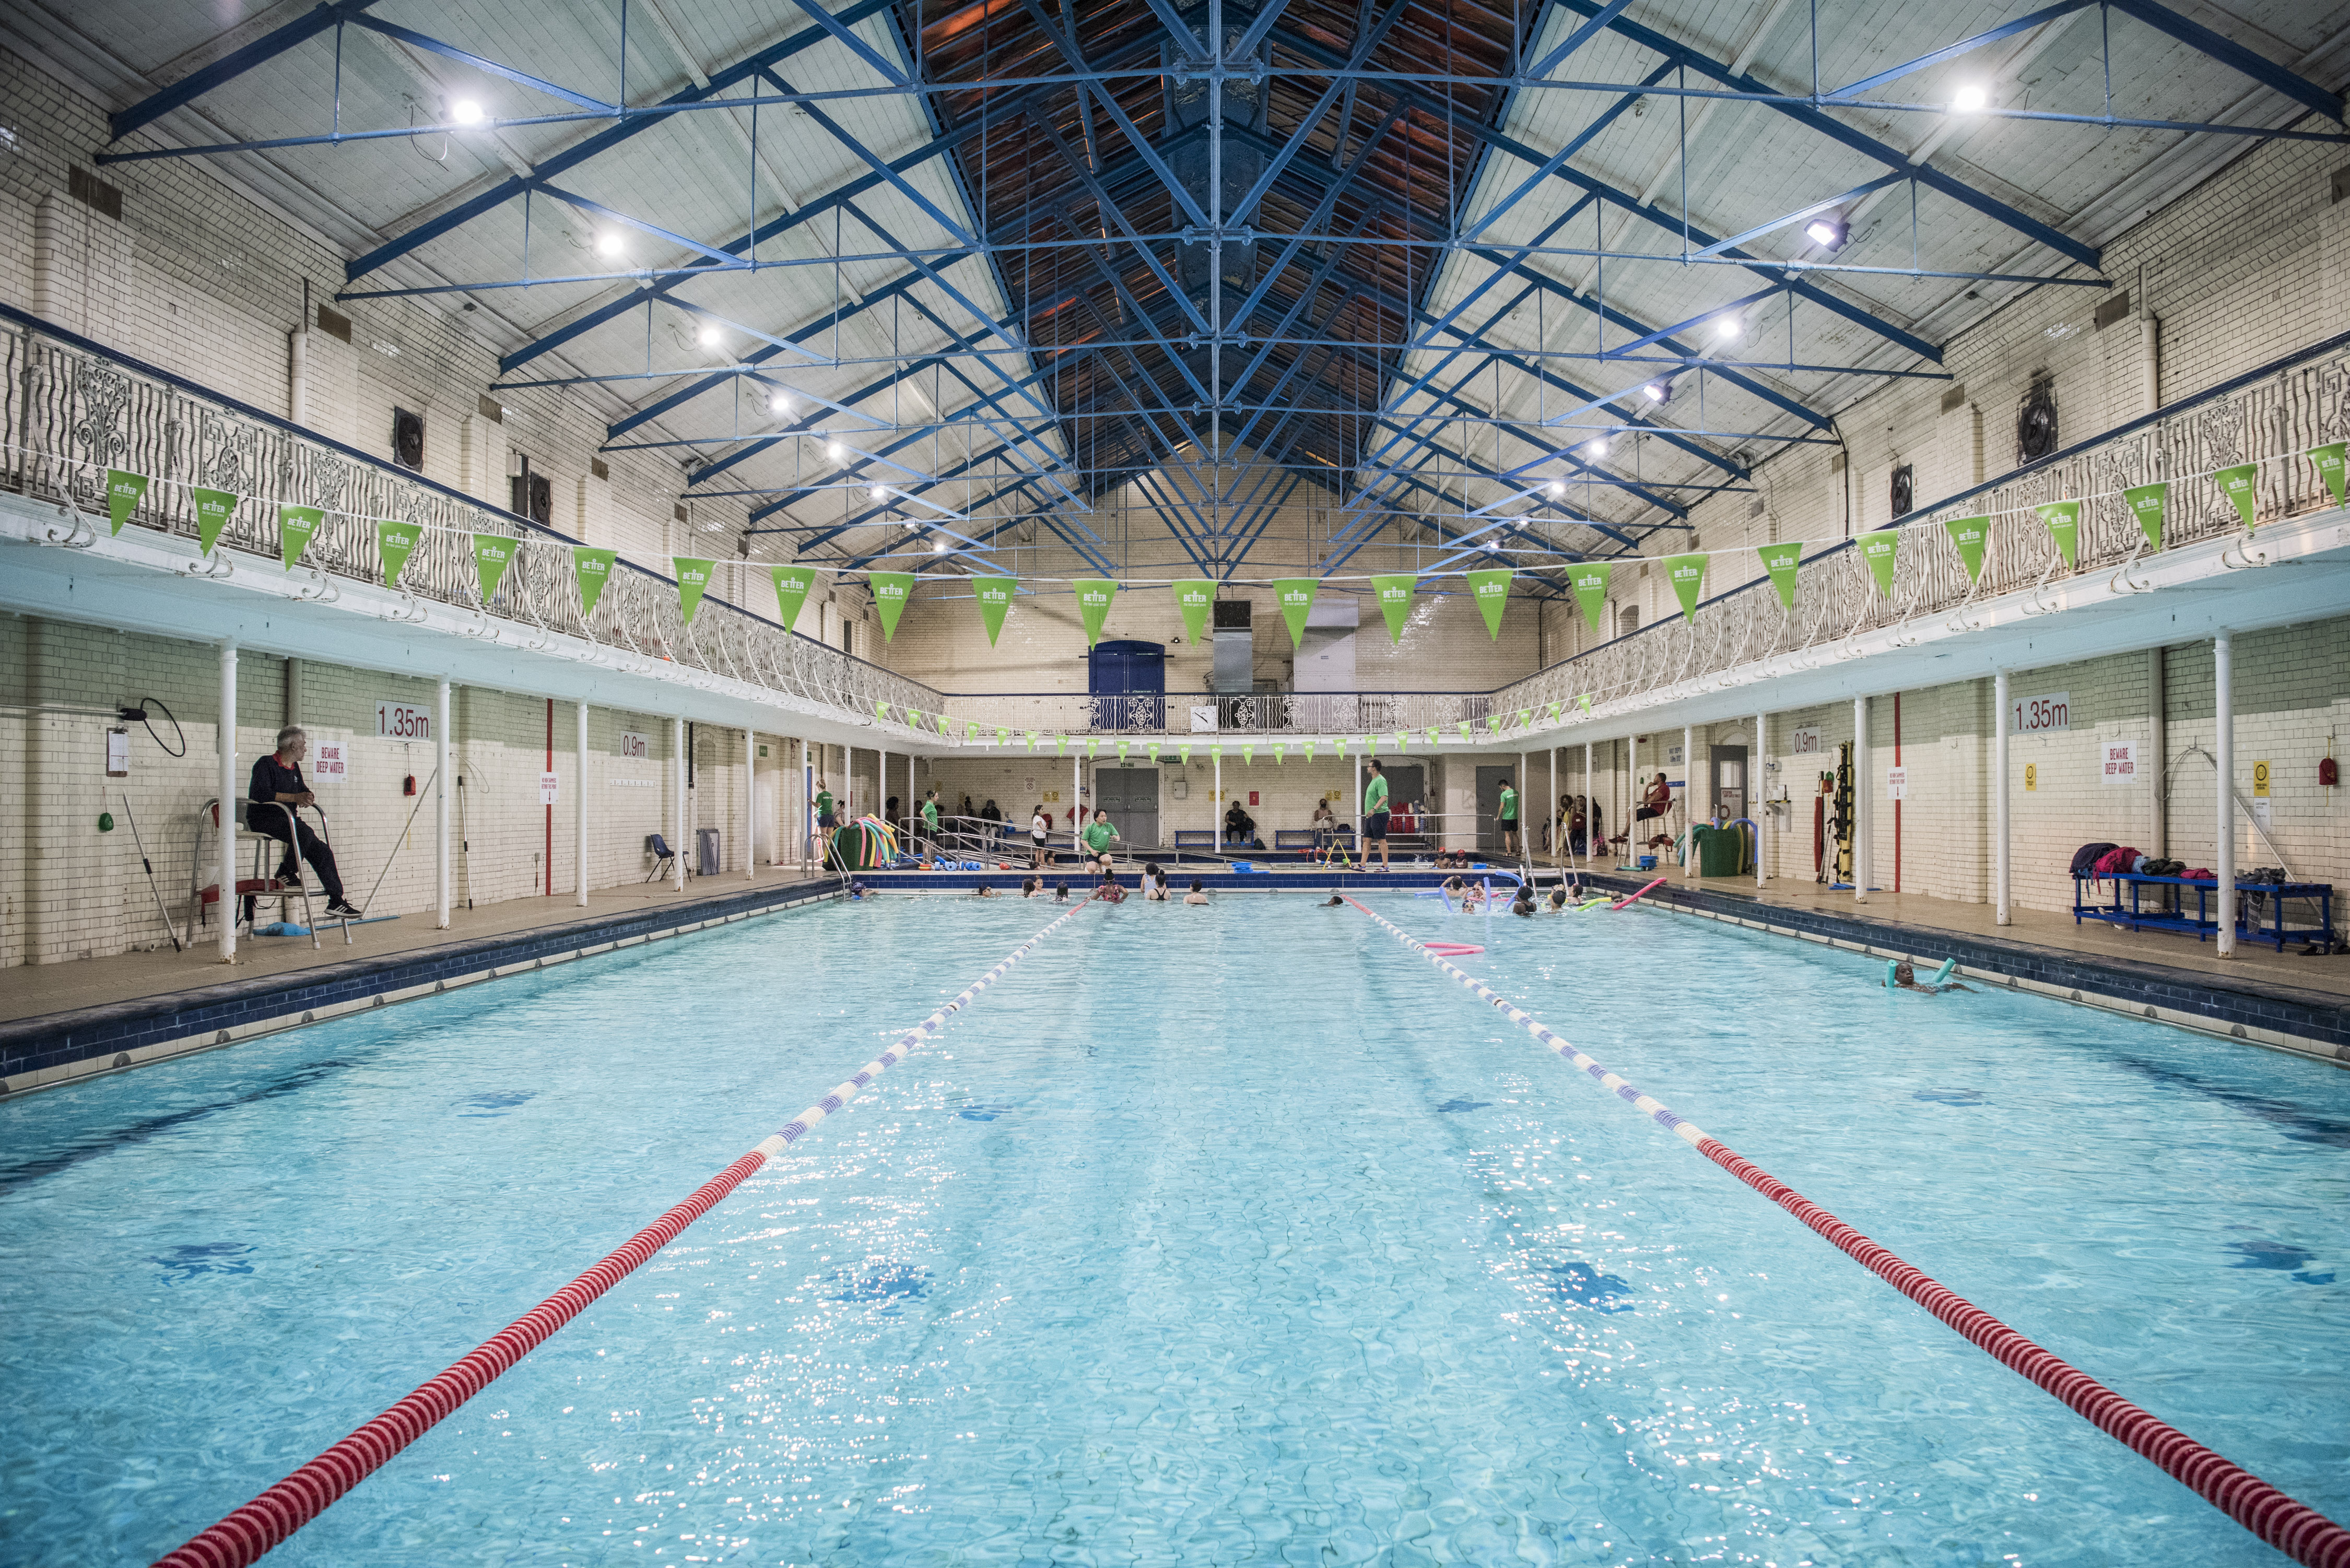 Inside of Kings Hall Leisure Centre swimming pool.